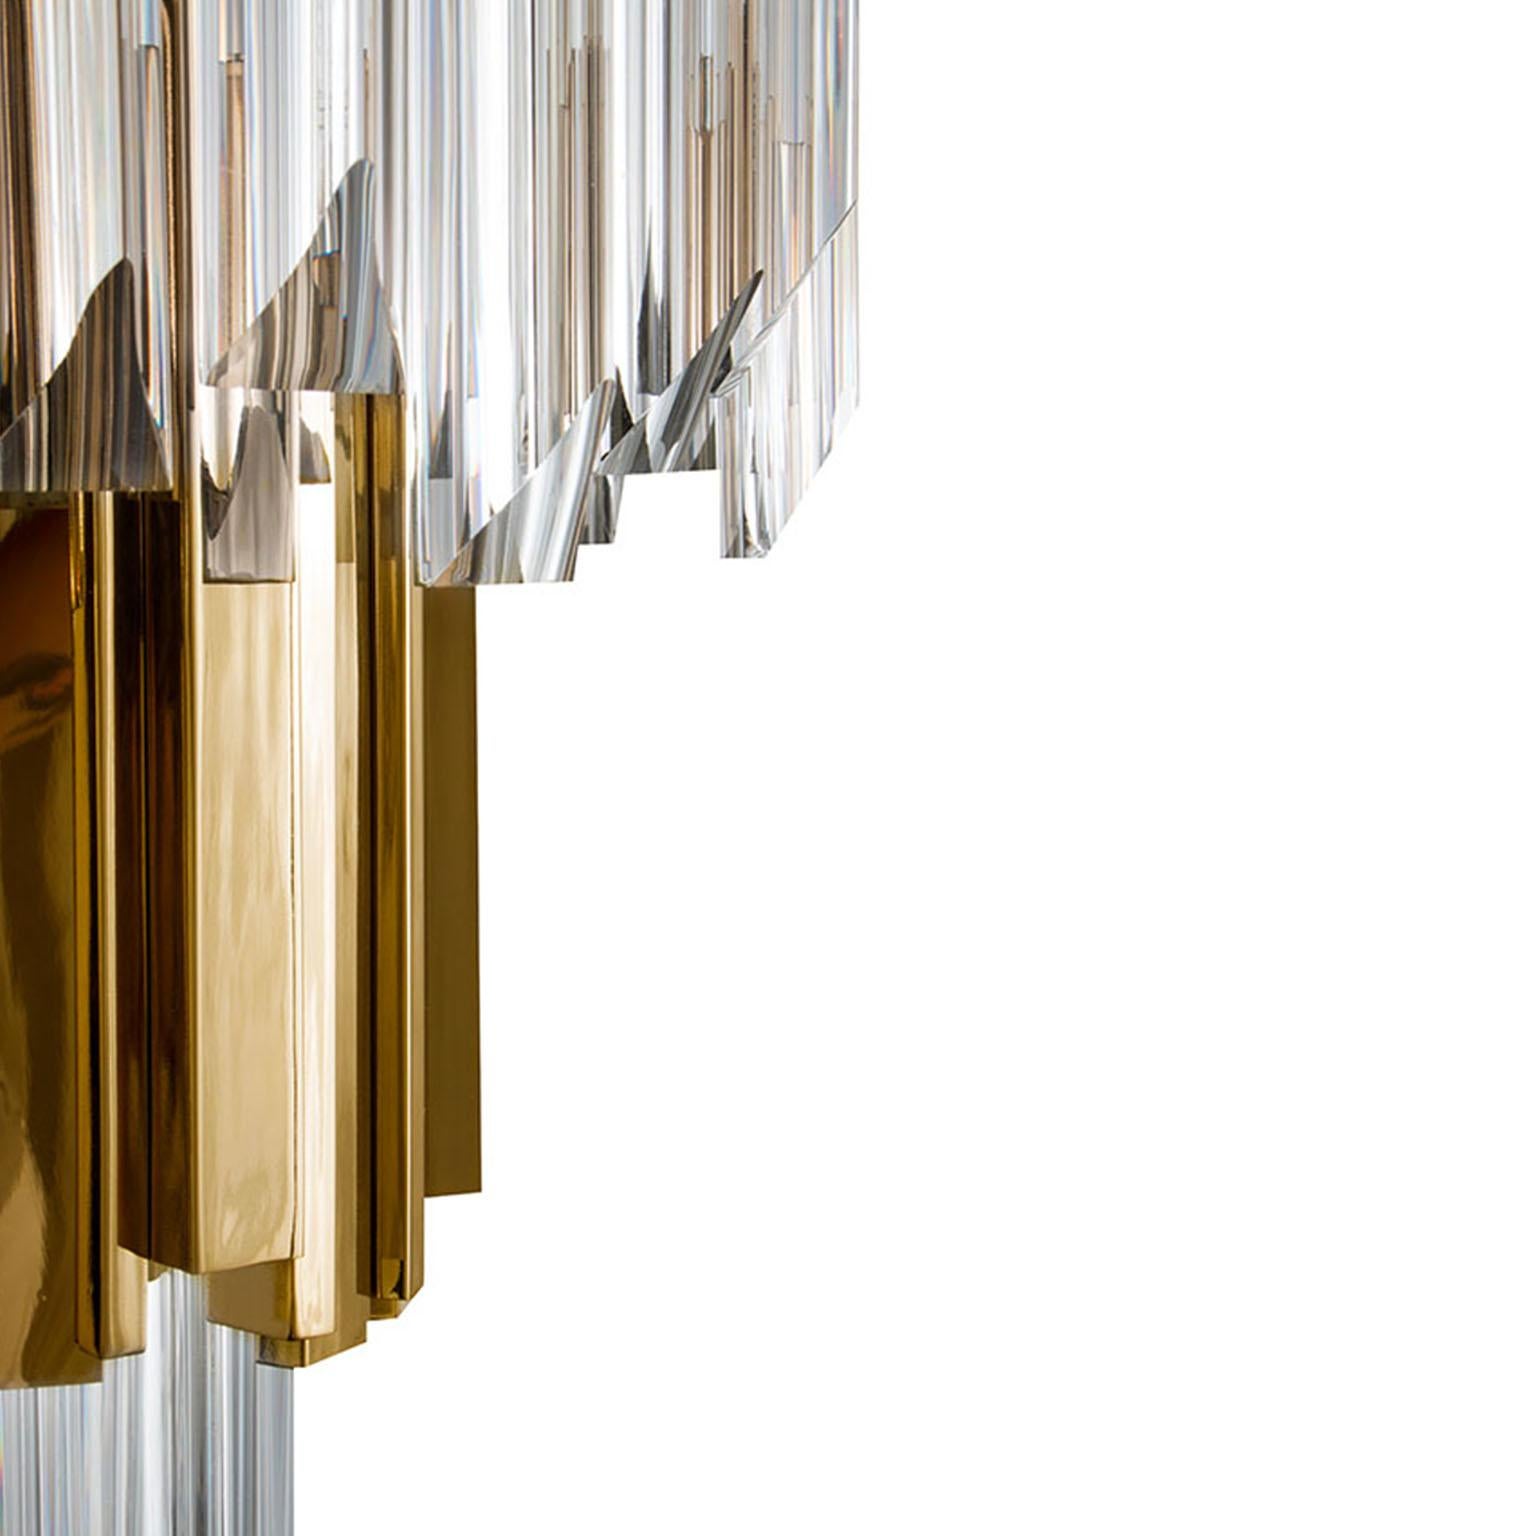 Our Empire chandelier is inspired by the stunning architecture of The Empire State Building. It’s a masterpiece with an extravagant shape, capable of transforming every space into a stunning scenario. Due to its vigorous personality, it creates an